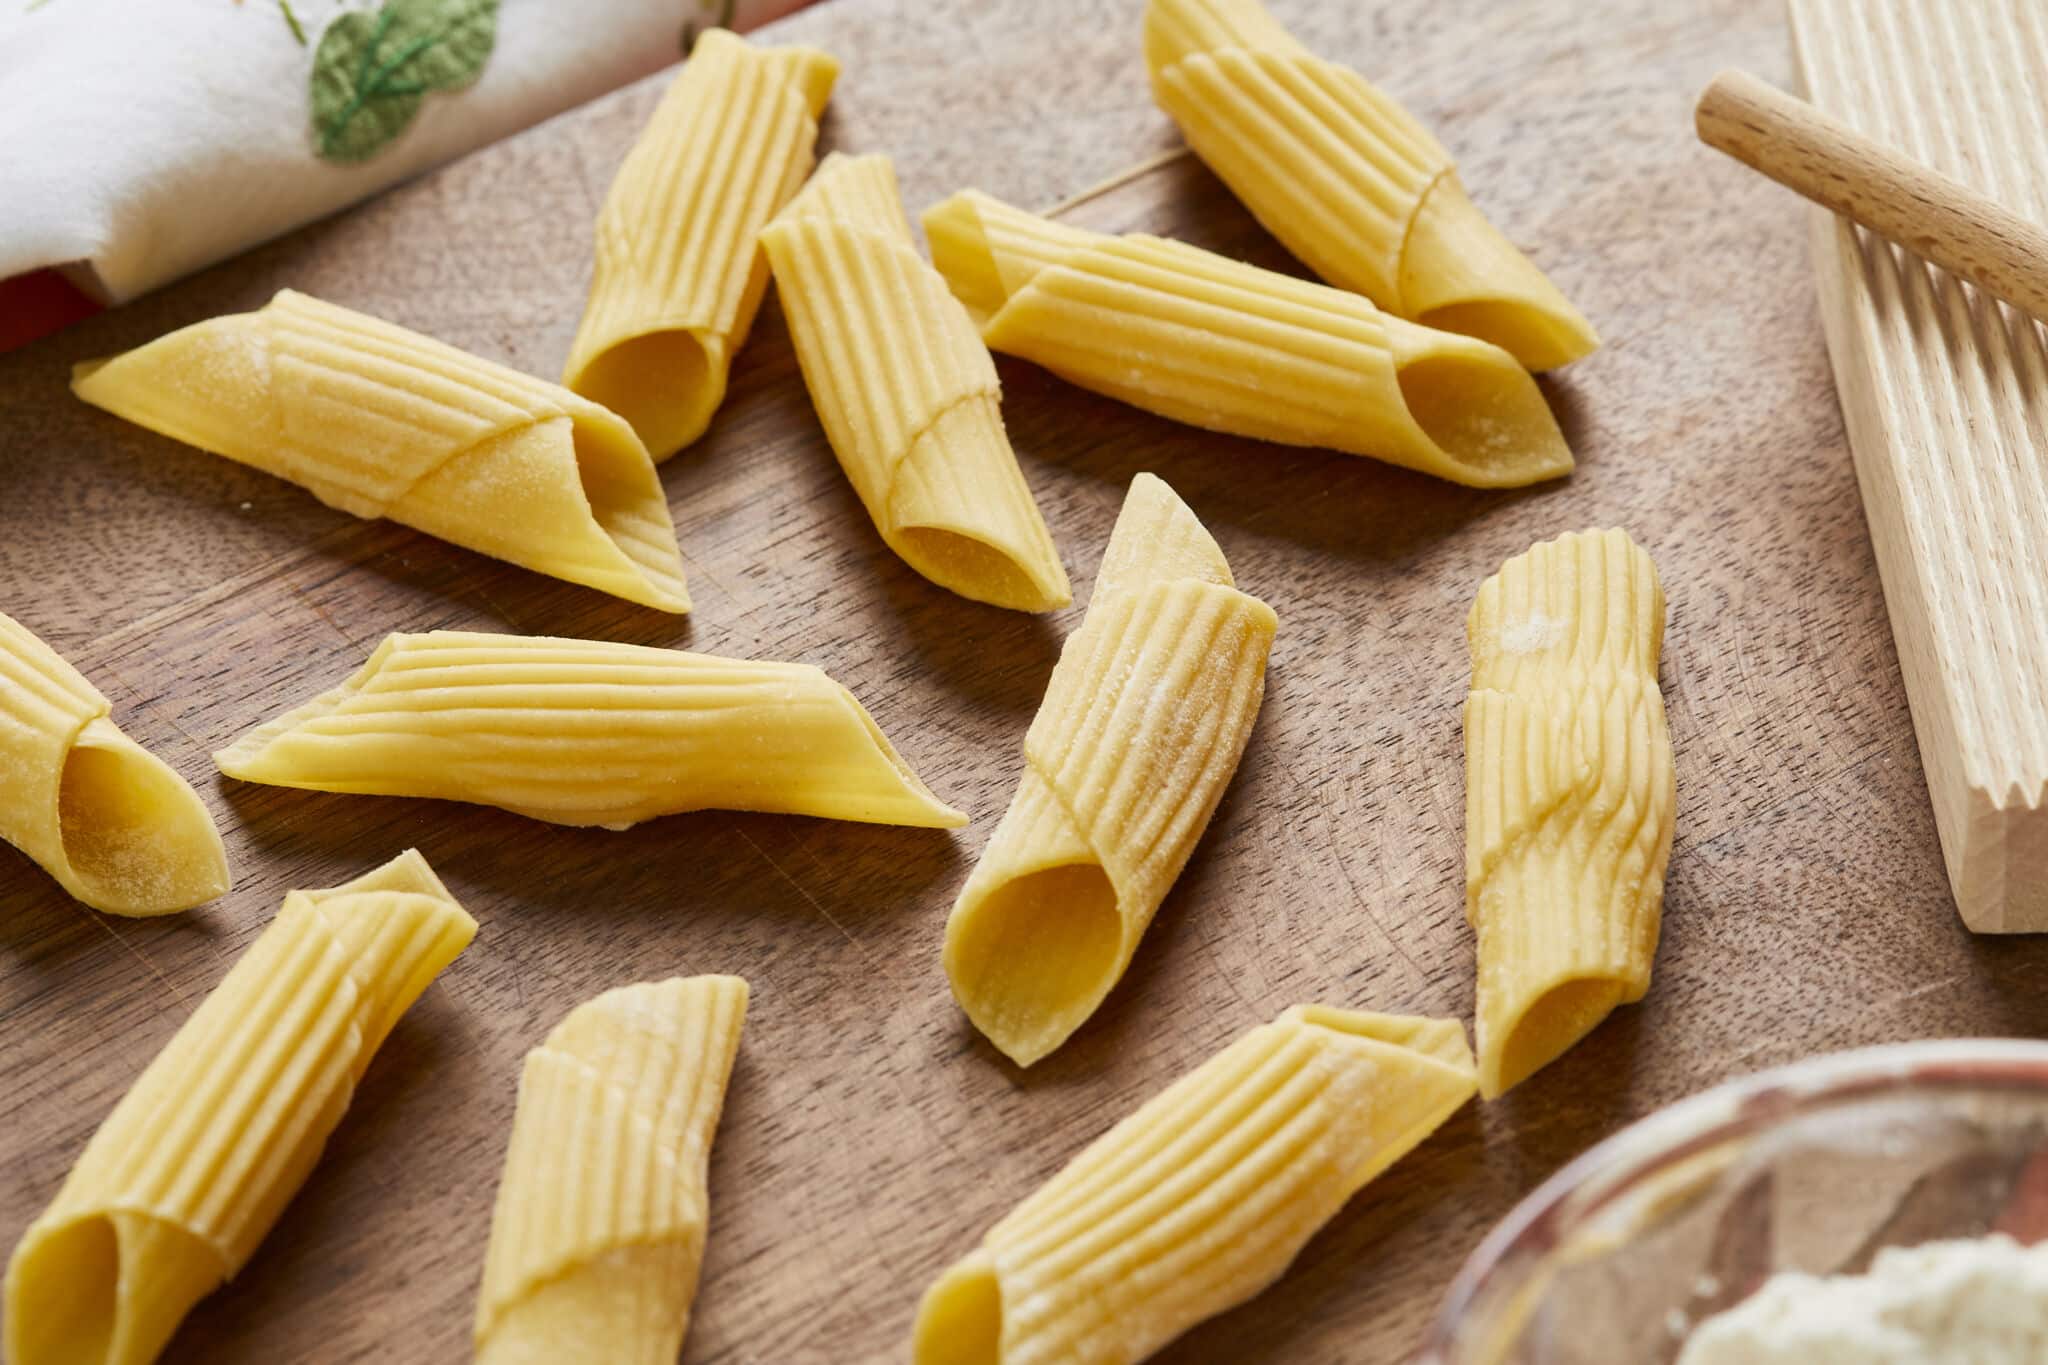 How to Make Pasta Noodles with THIS Foolproof Recipe